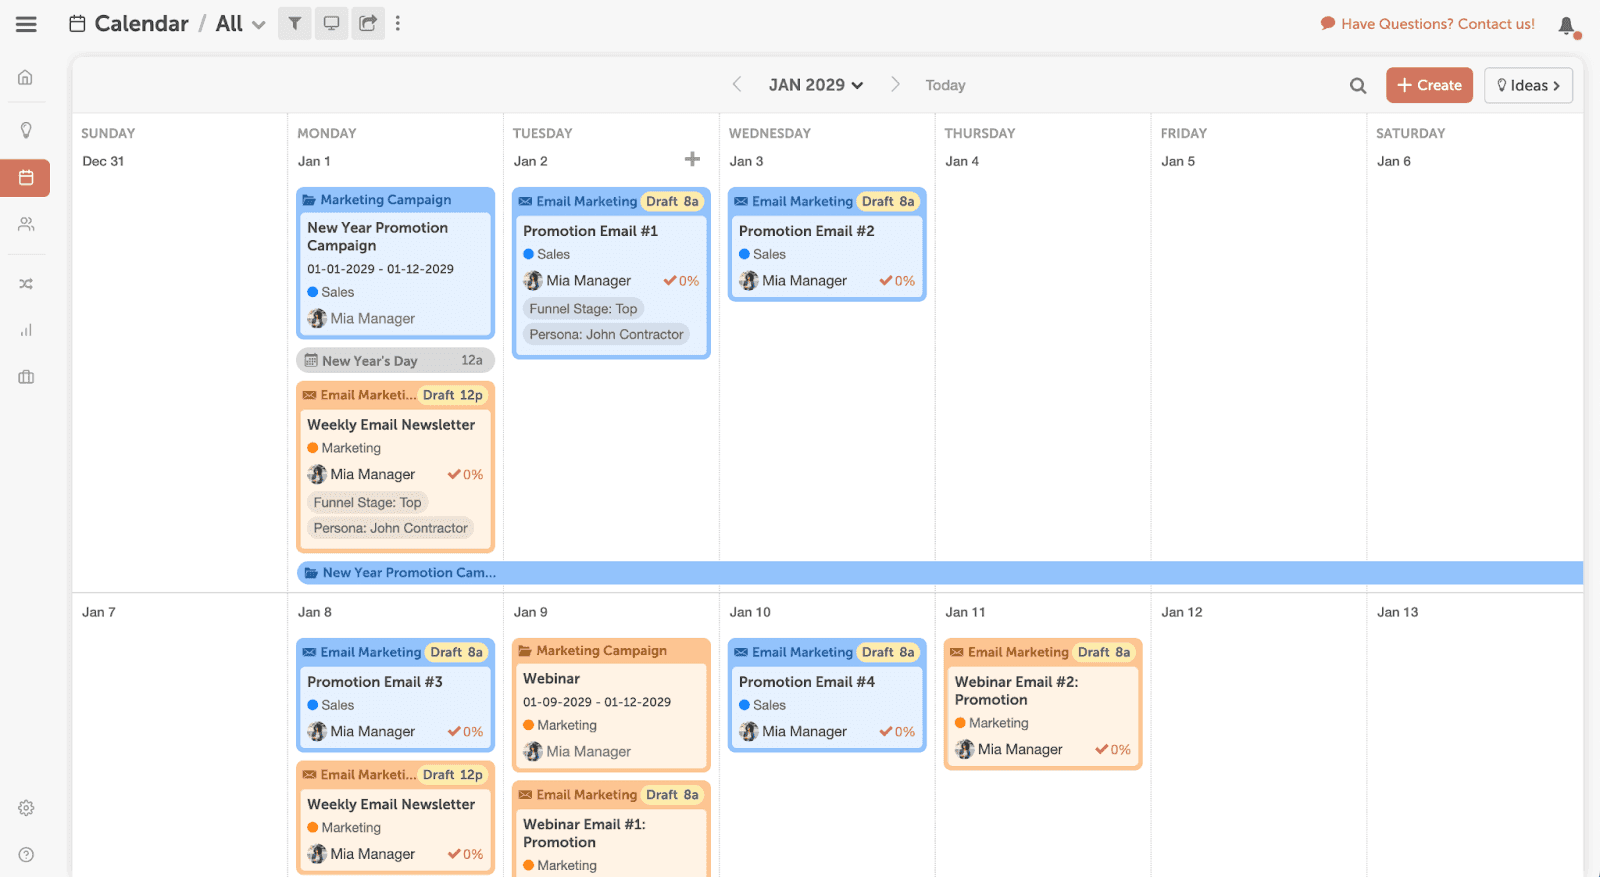 CoSchedule's calendar allows projects to be moved to new dates 